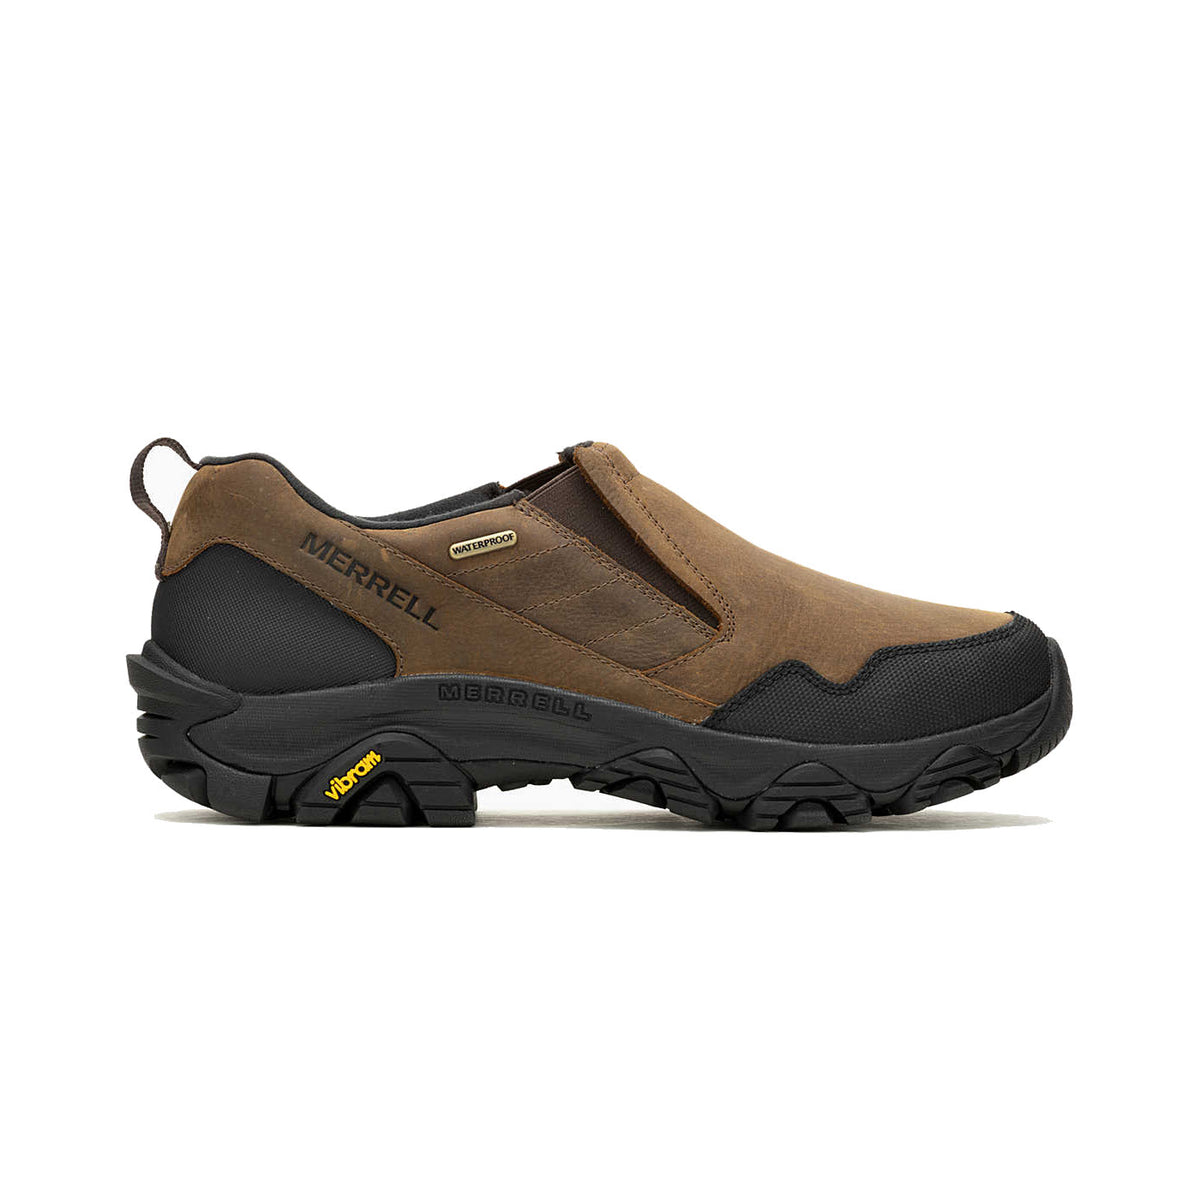 A single Merrell Coldpack 3 Thermo Moc WP Earth winter moc sneaker in profile view, featuring a brown and black color scheme with yellow accents and Vibram Arctic Grip sole.